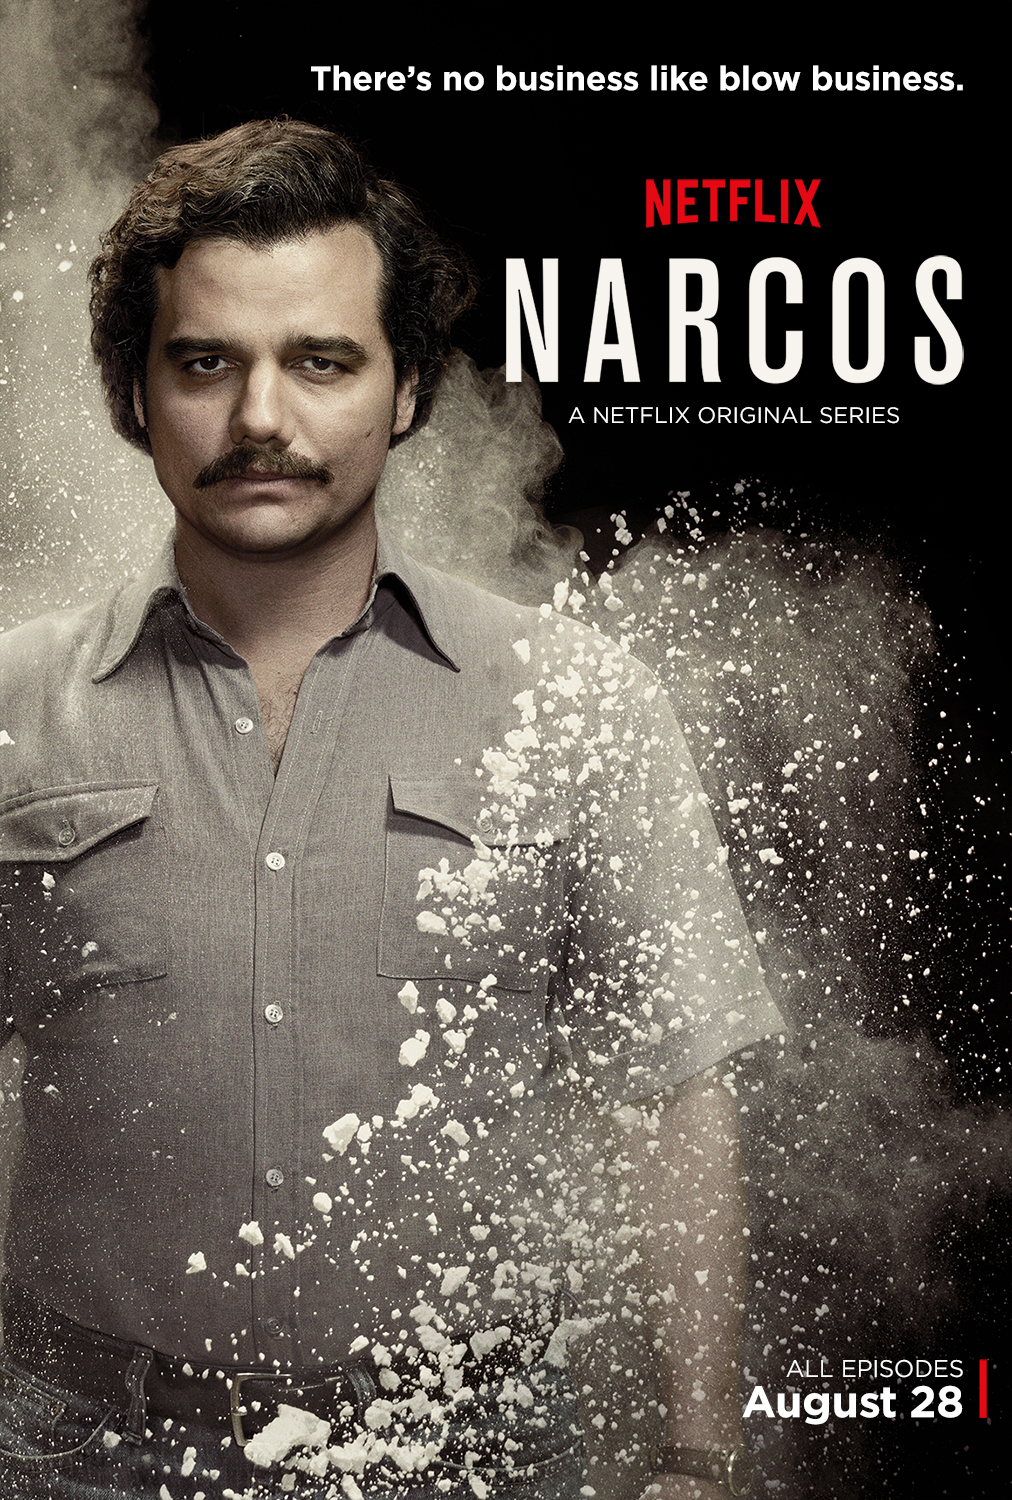 Wagner Moura In Narcos